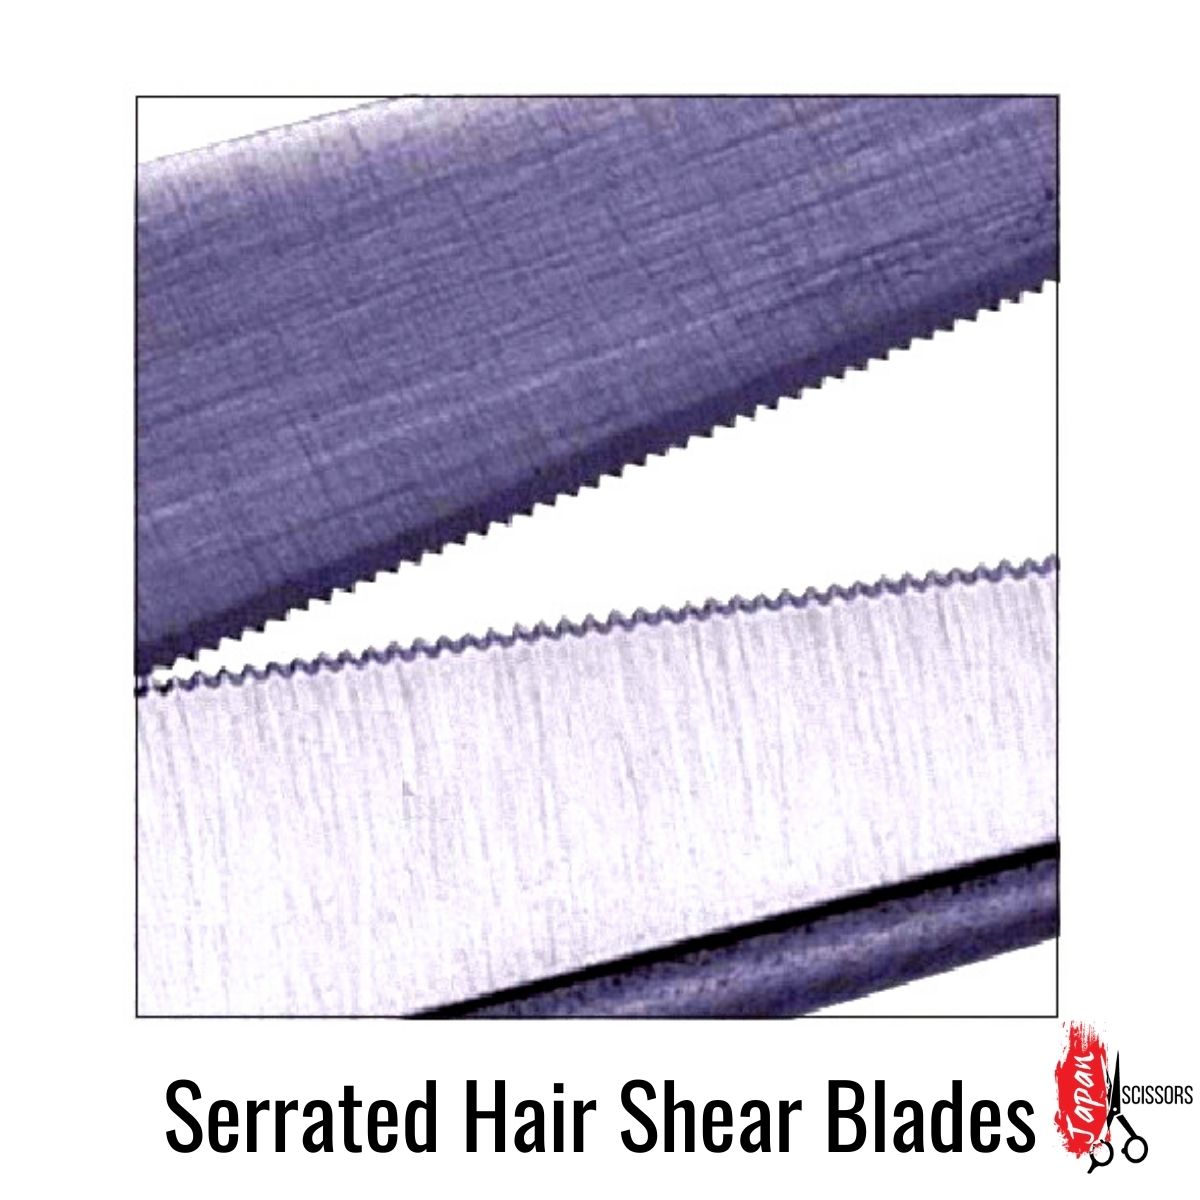 A closeup of a serrated hair cutting shear blade for beginners, apprentices and hairstylists